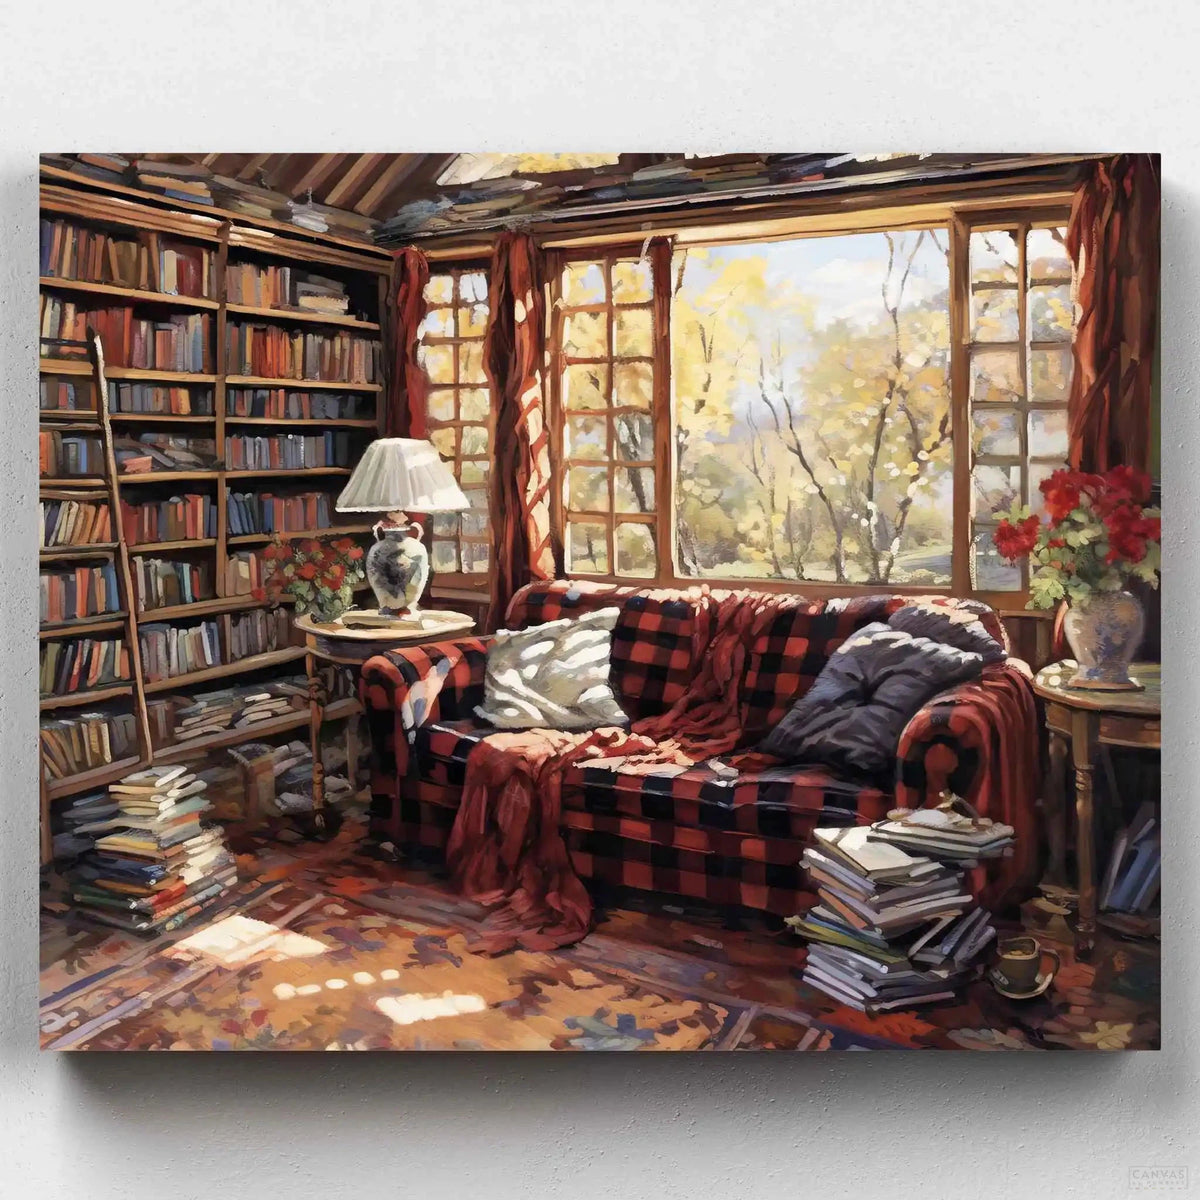 Reader's Haven - A Bookshelf Painting by Numbers Kit-Paint your own peaceful escape with 'Reader's Haven', a delightful bookshelf painting by numbers kit capturing the serene bliss of a reader's cozy nook.-Canvas by Numbers